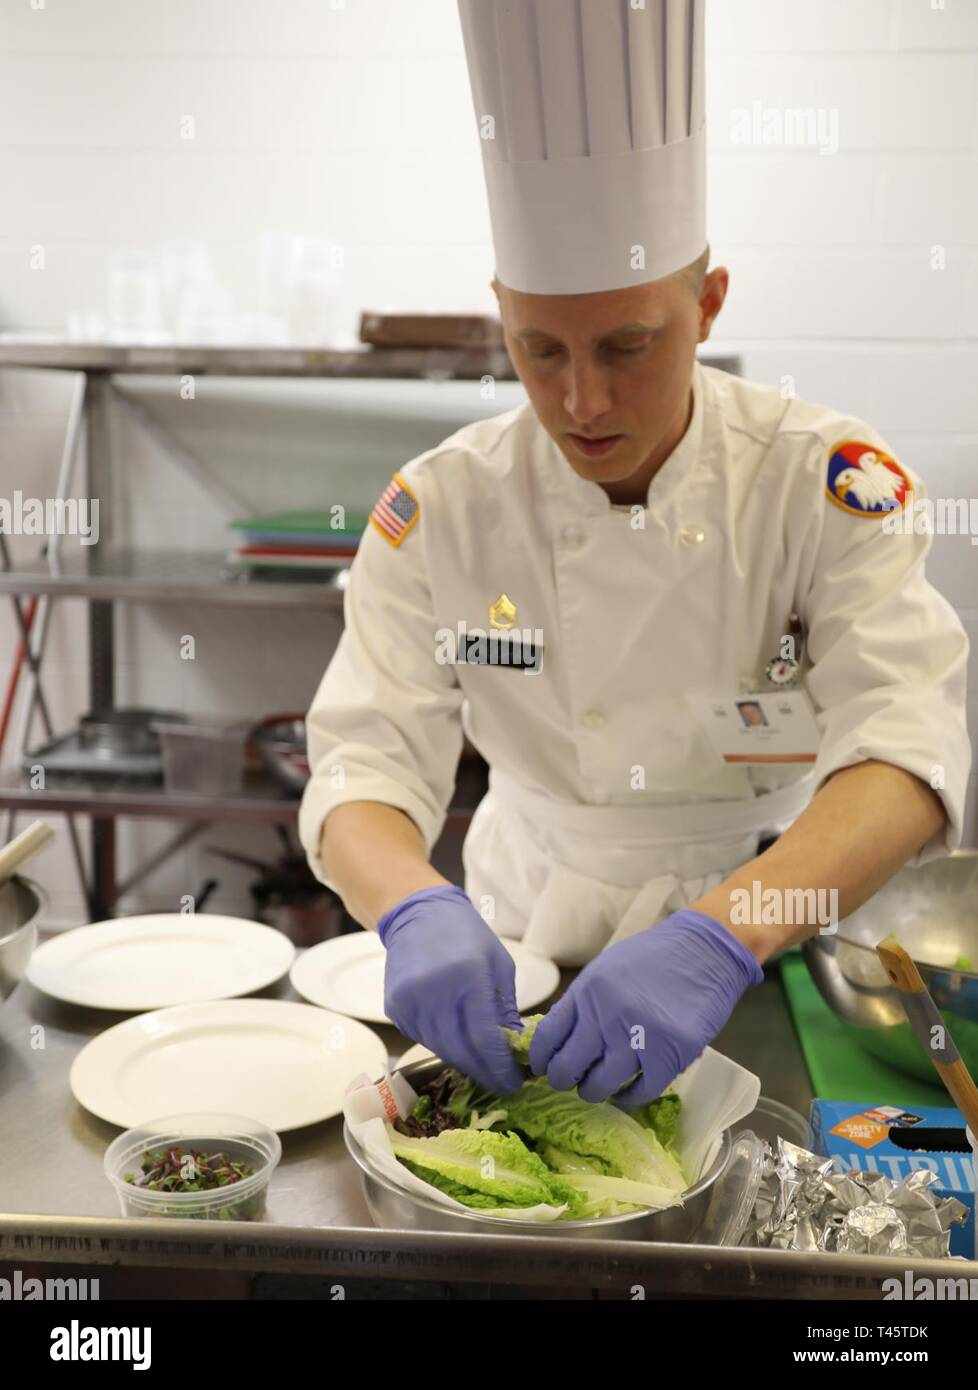 Staff Sgt. Jeffrey Vaughan, culinary arts specialist, U.S. Army Military Intelligence Readiness Command, Army Reserves, prepares lettuce for plating during the Armed Forces Chef of the Year event March 8 at the Joint Center of Culinary Excellence as part of the Joint Culinary Training Exercise at Fort Lee, Va. The 44th annual JCTE officially starts March 9 at MacLaughlin Fitness Center and continues until March 14. The exercise, administered by the Joint Culinary Center of Excellence, is the largest American Culinary Federation-sanctioned competition in North America. The exercise showcased th Stock Photo